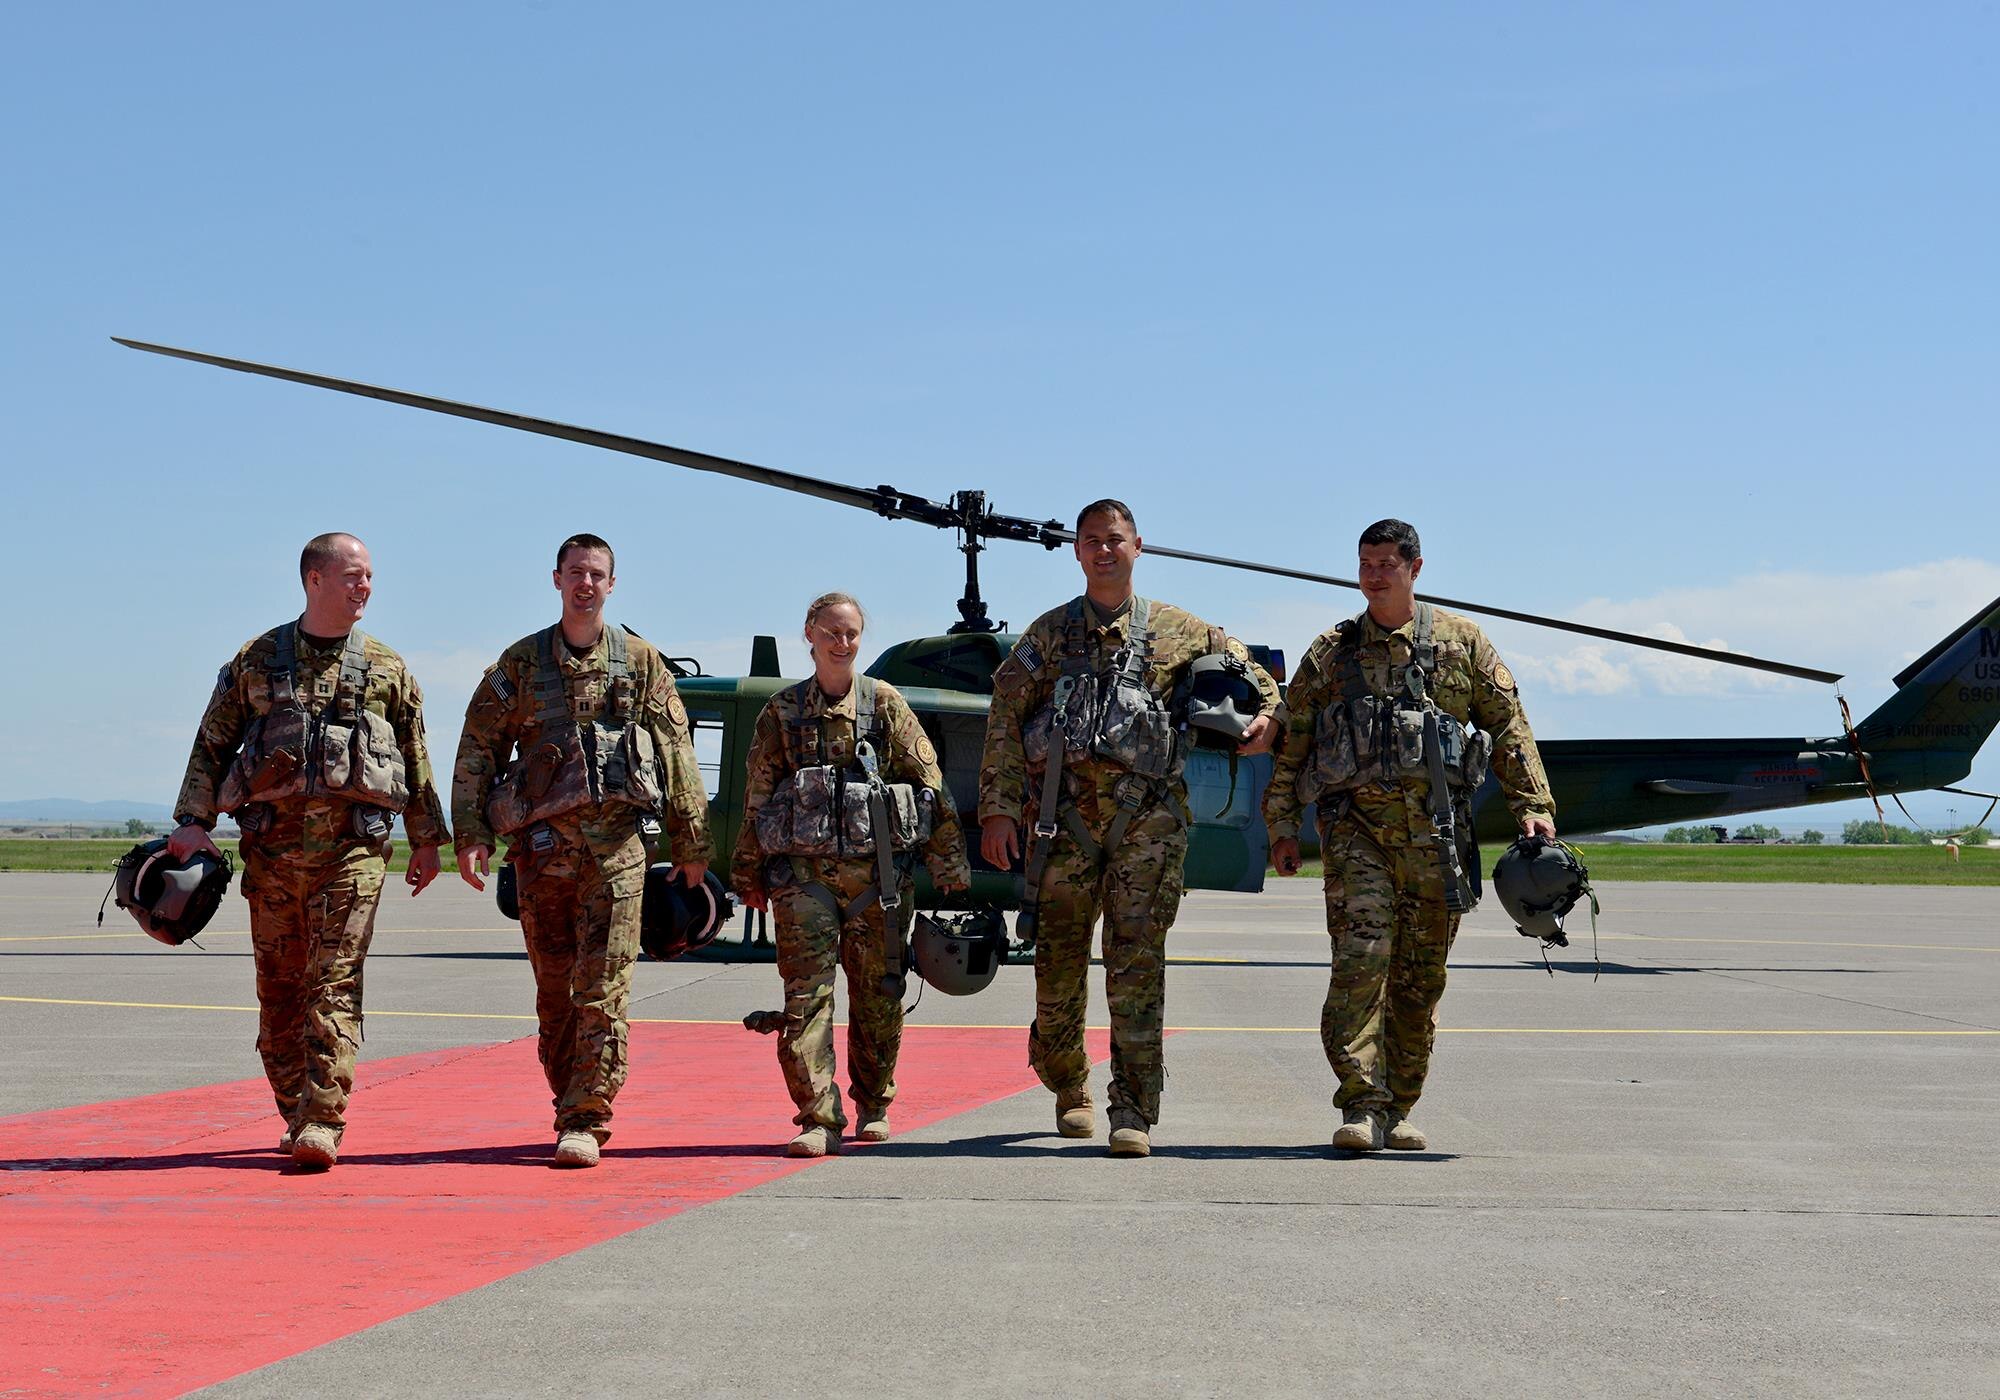 (From left to right) Capt. James Harris, 40th Helicopter Squadron co-pilot, Capt. Matt Thompson, 40th HS pilot, Maj. Melonie Parmley, 341st Medical Group flight surgeon, Tech. Sgts. Andrew Blankenship and Daniel Marchick, 40th HS special mission aviators, walk away from a helicopter May 30, 2017, at Malmstrom Air Force Base, Mont. The crew saved two girls and their dog Tuesday morning after the girls got lost while hiking in Sluice Boxes State Park Monday night. (U.S. Air Force photo/Staff Sgt. Delia Marchick)